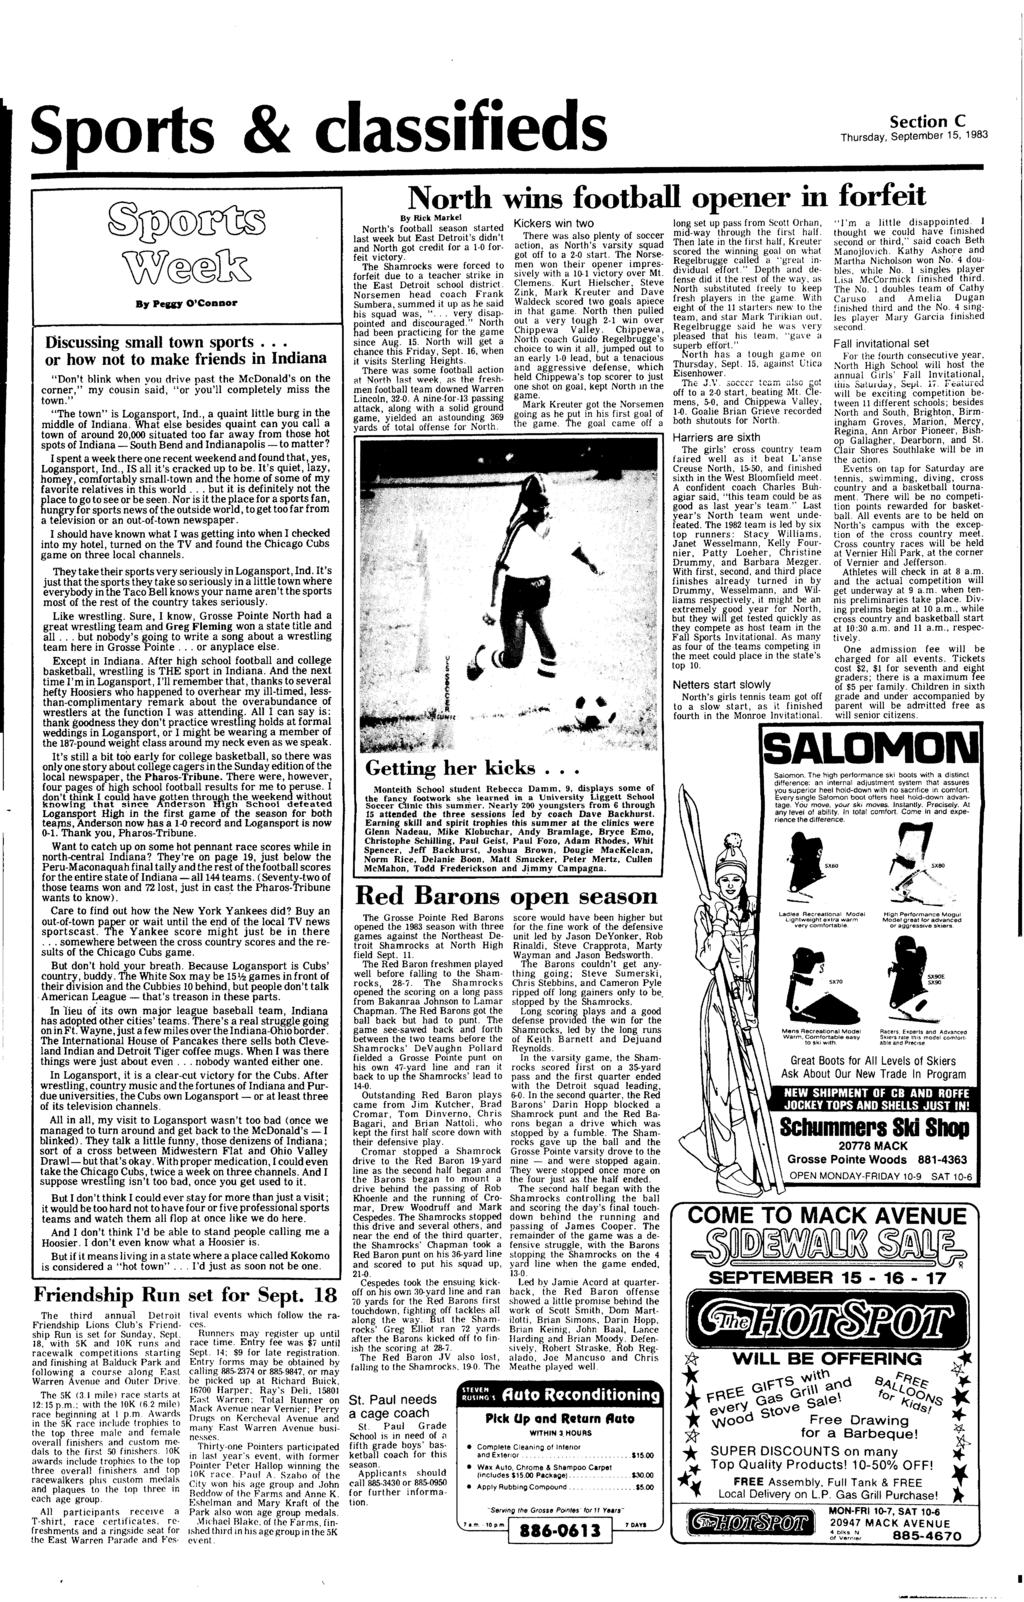 Sports & classifieds Section C Thursday, September 15, 1983 s,. PeaJ' O'ConDor Discussing small town sports.